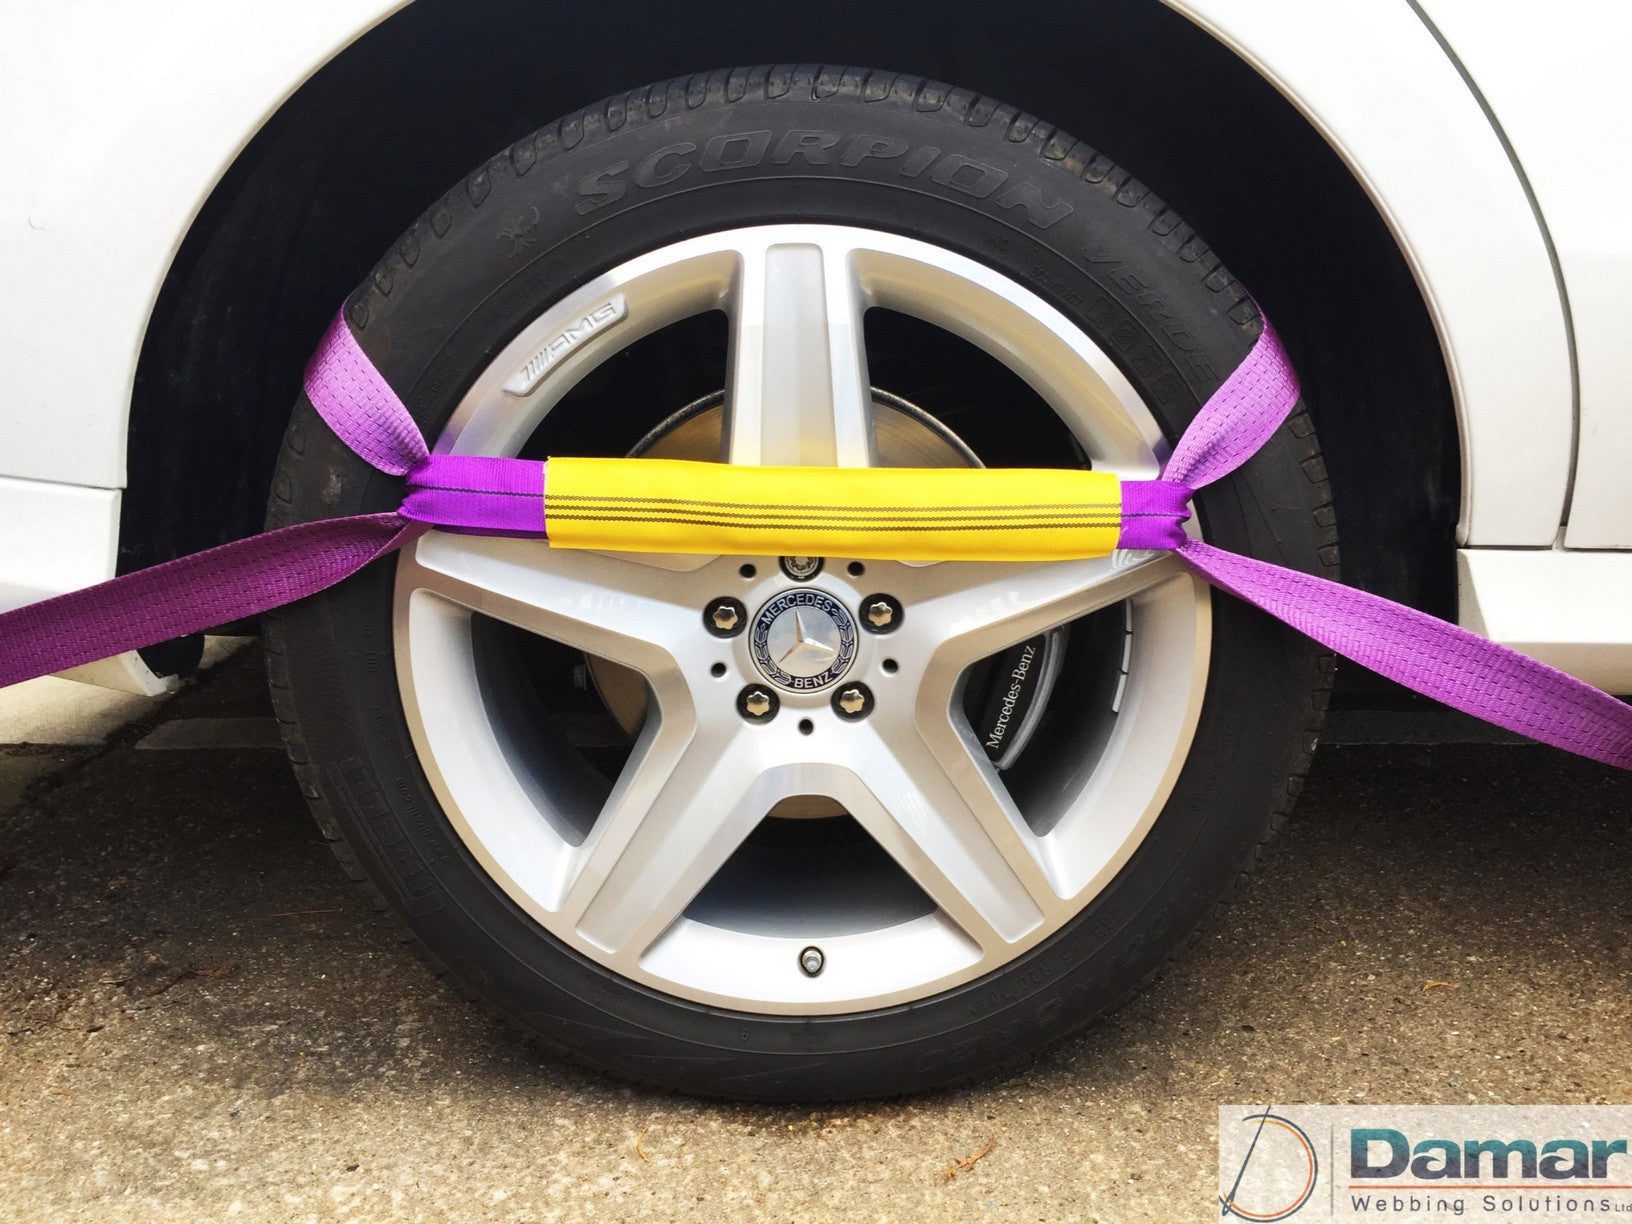 Diversity Wrap 1T Recovery Alloy Wheel Securing Link Straps 50cm x5cm Yellow/Purple 6 